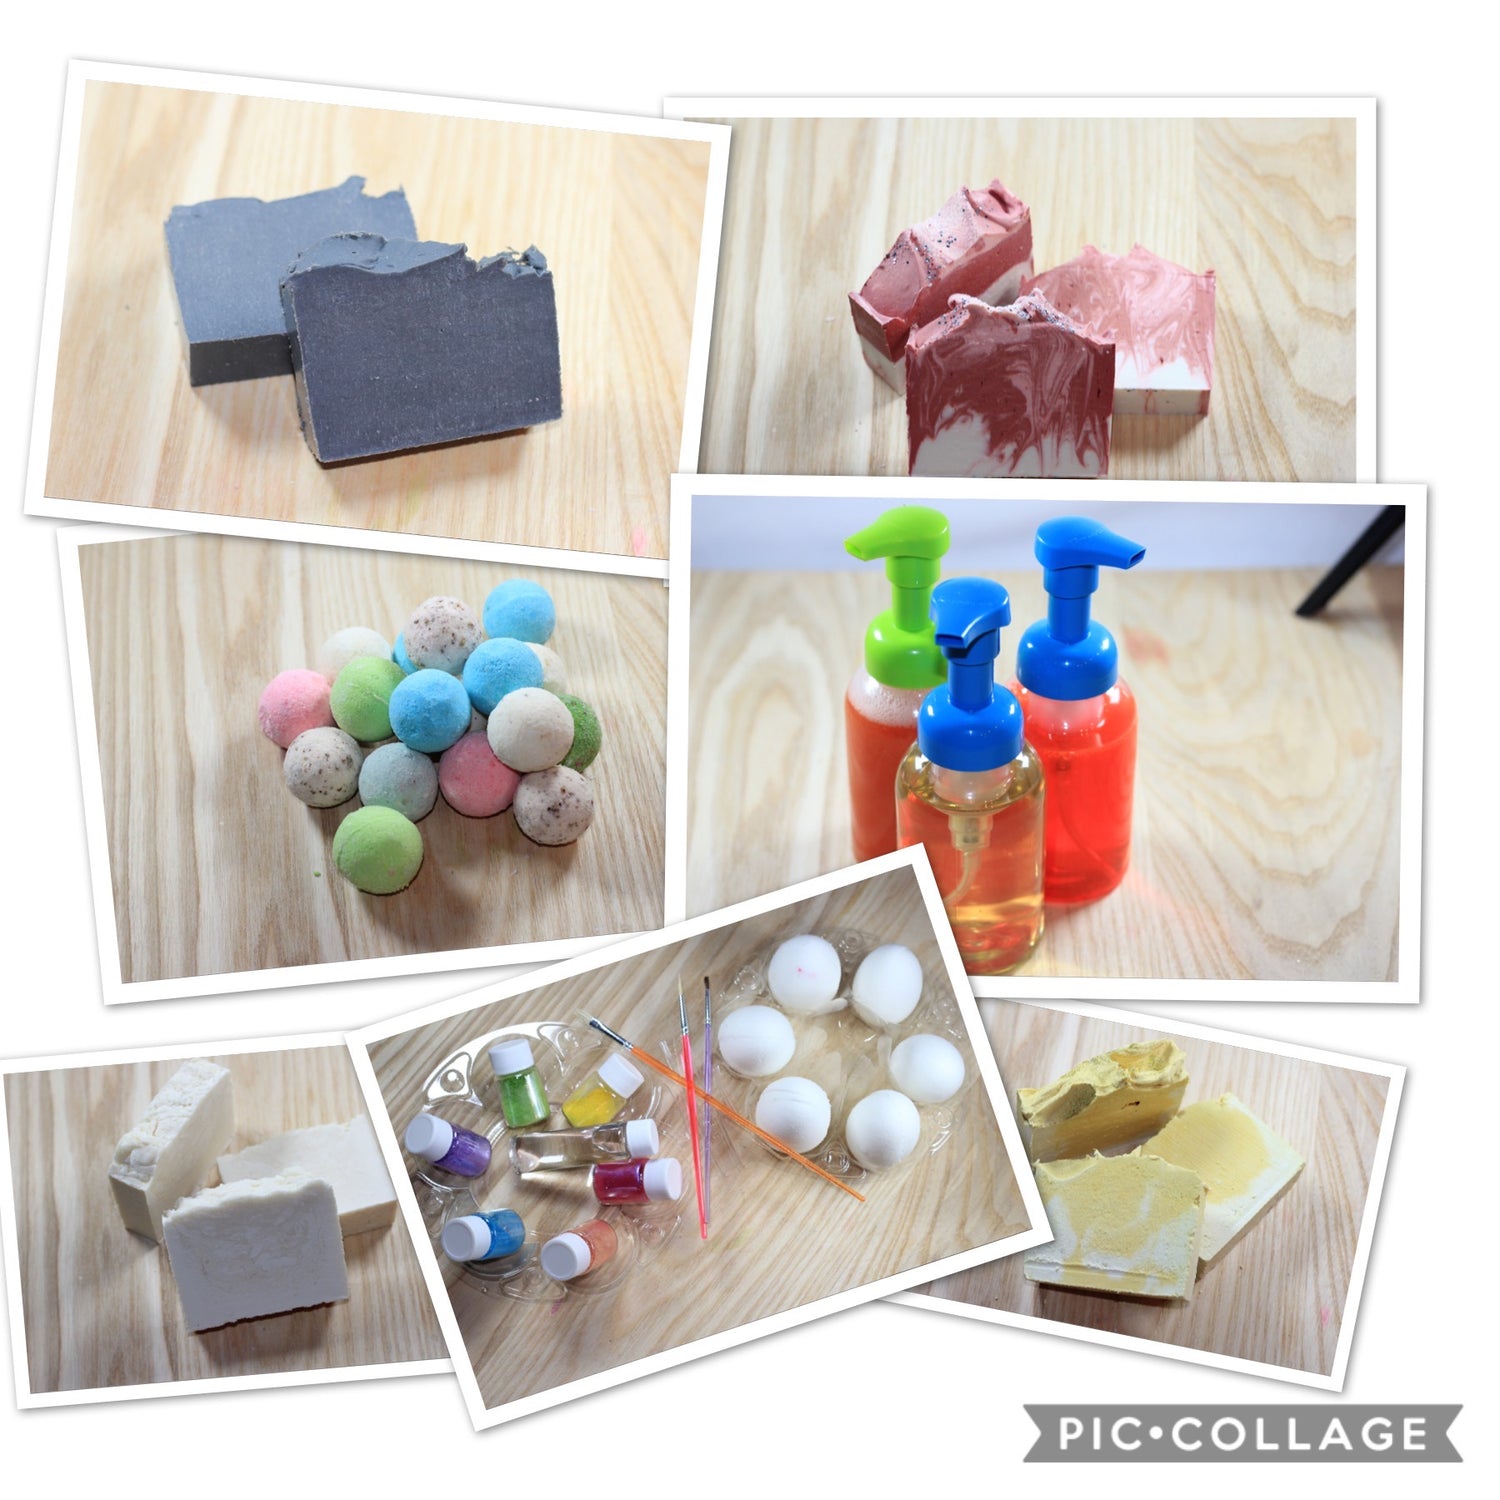 Soaps & Such - Pre-Made Items